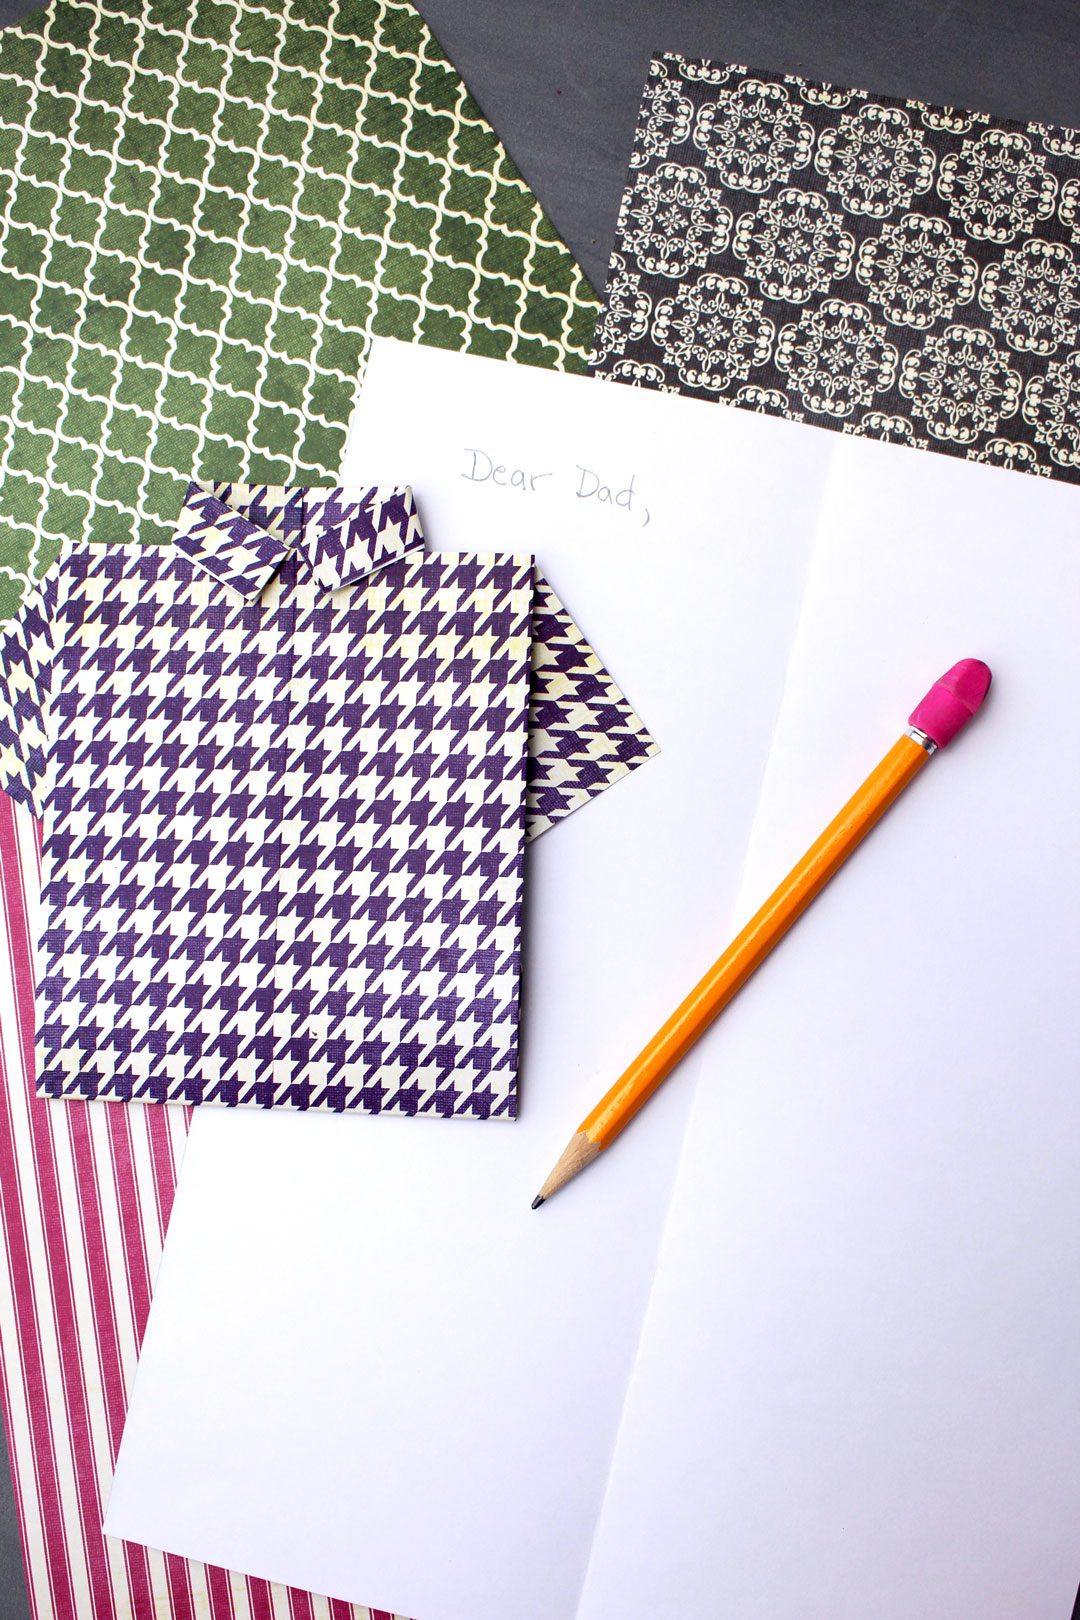 A folded origami shirt card next to several patterned scrapbook paper pieces, a pencil, and a note that reads, "Dear Dad,".